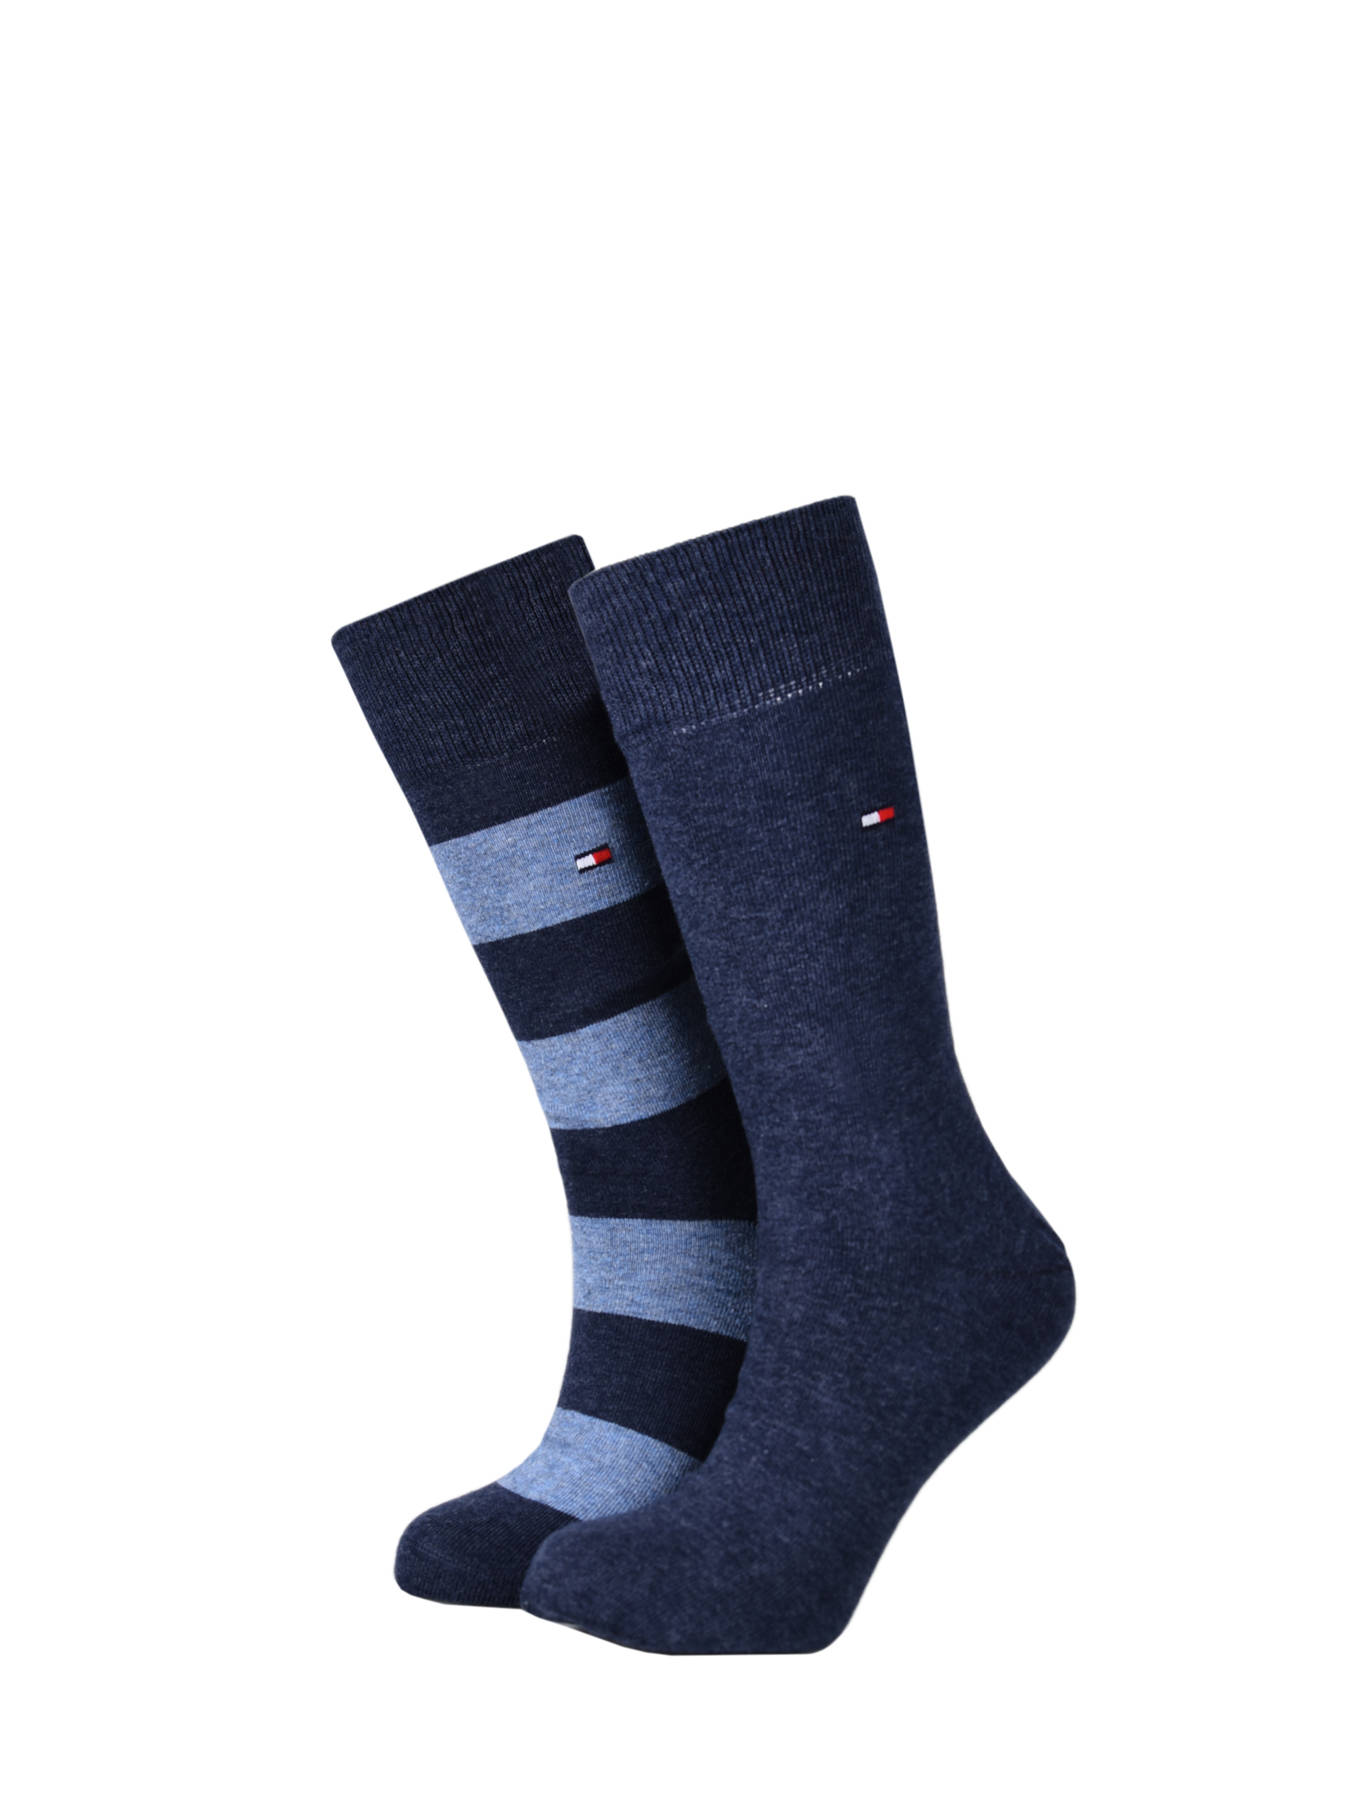 BNWT-Tommy Hilfiger Homme Trainer Chaussettes Bleu Jean Taille 9-11 2 Paires 